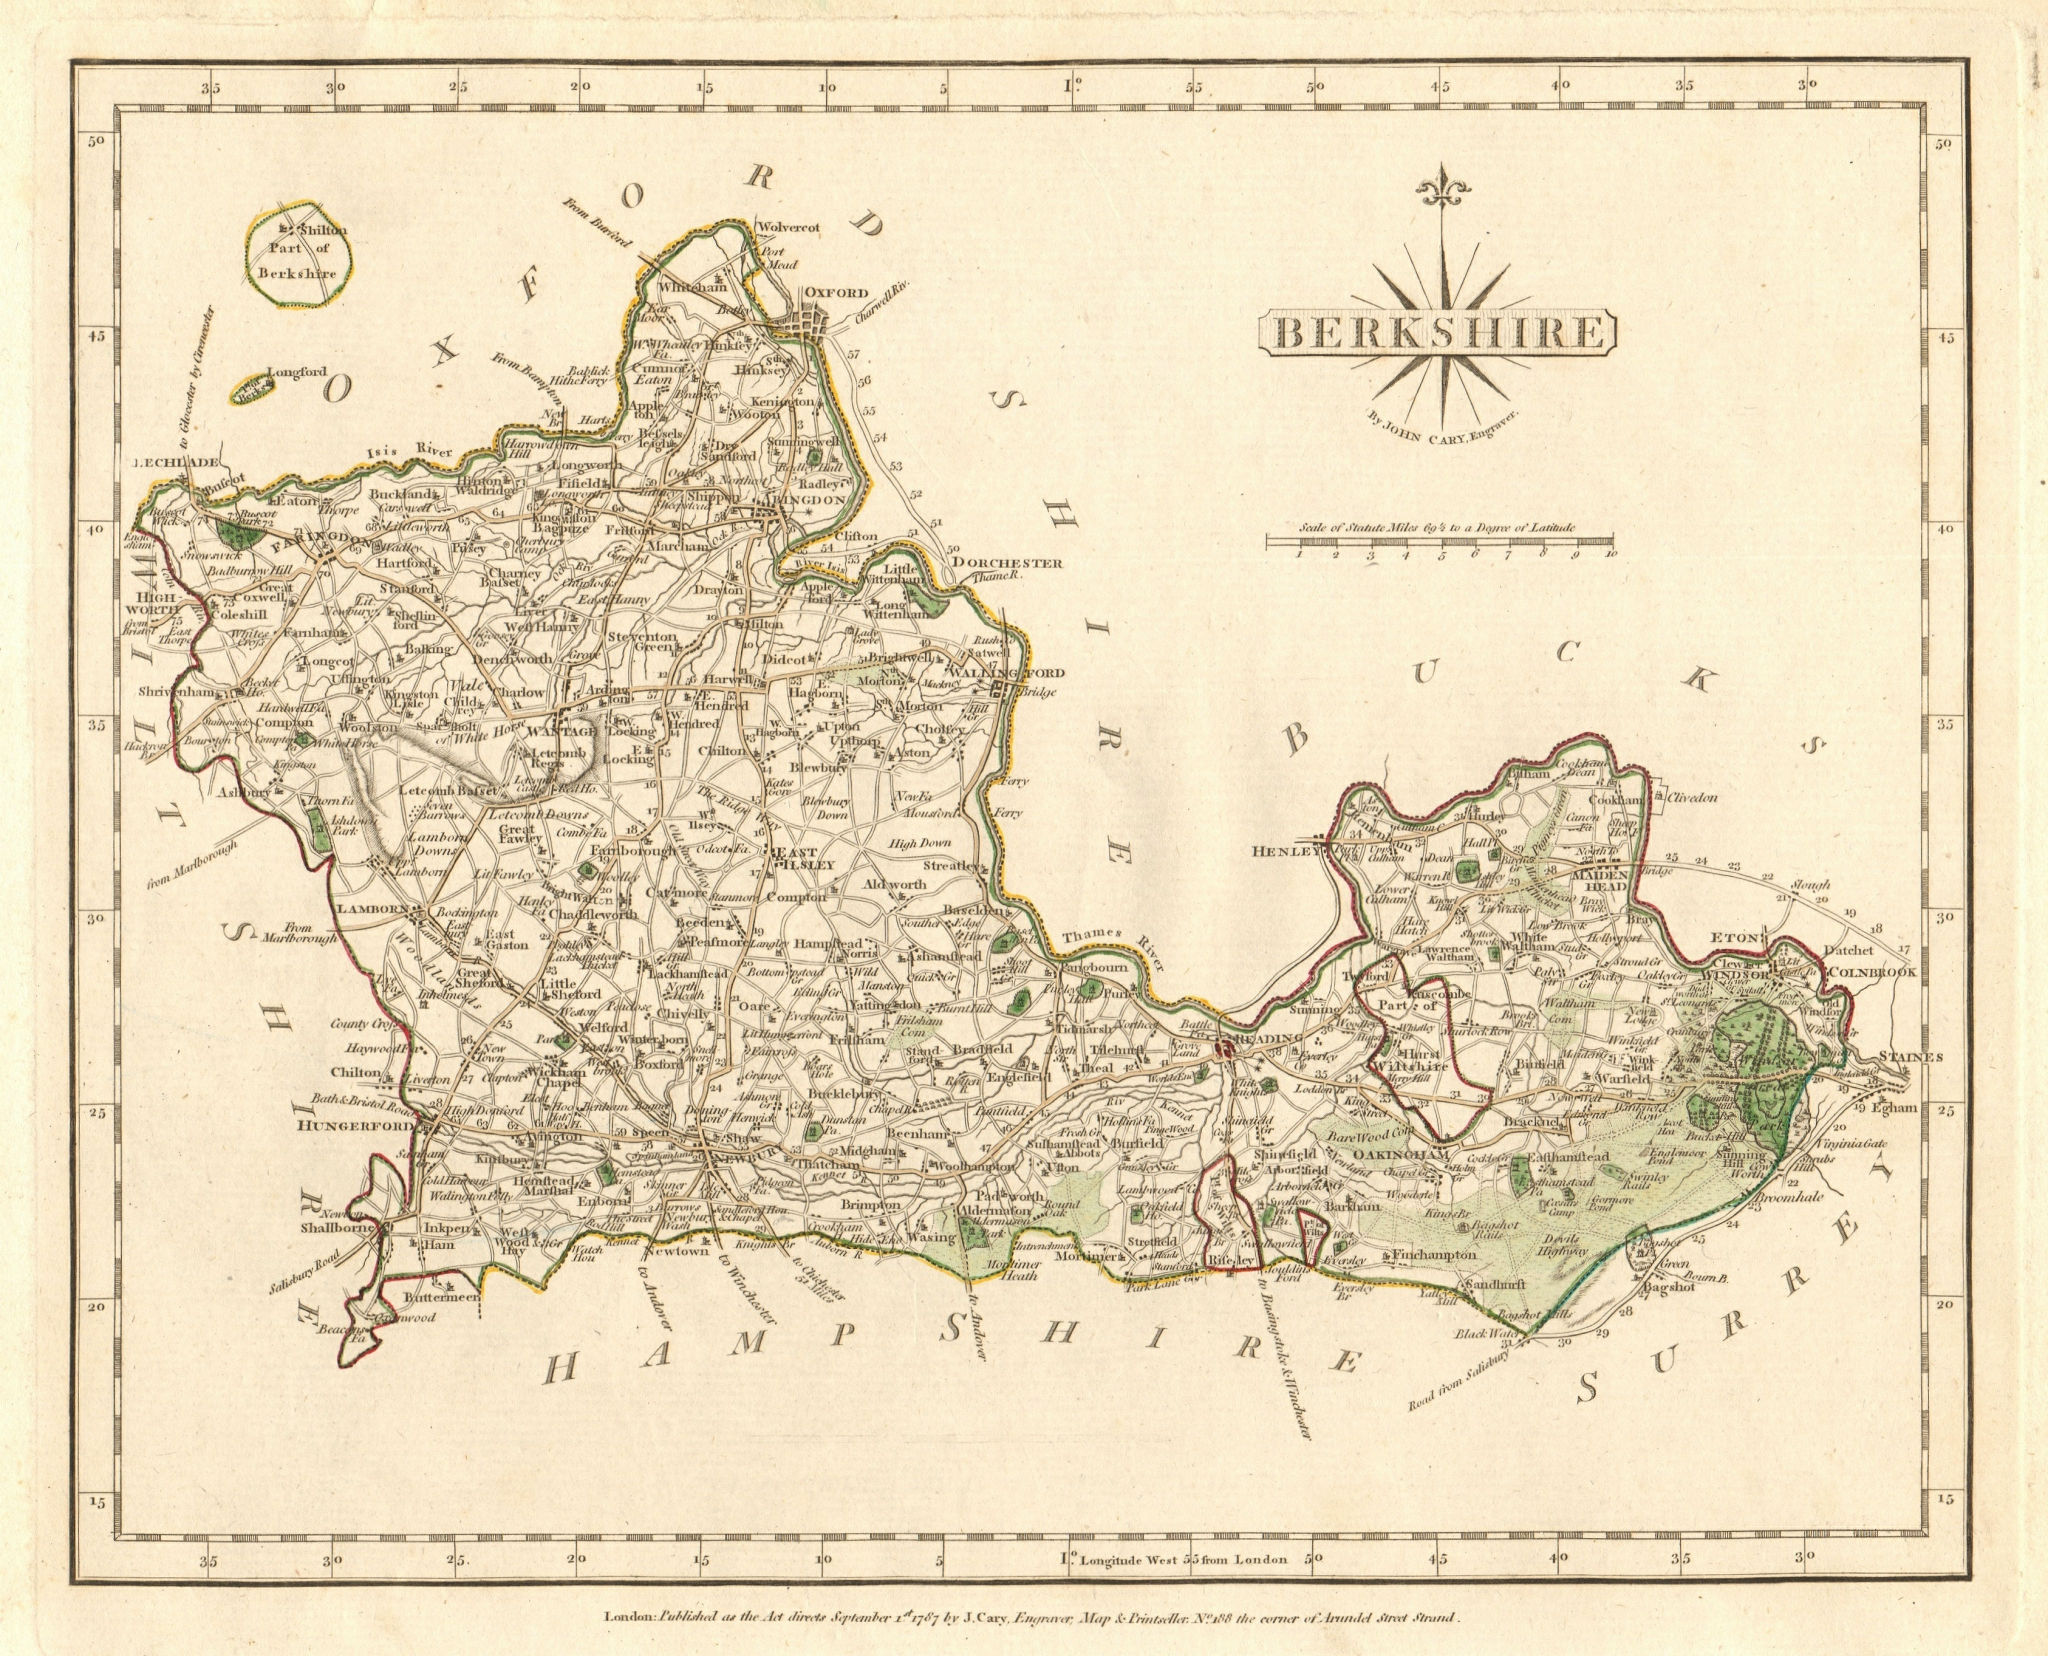 Associate Product Antique county map of BERKSHIRE by JOHN CARY. Original outline colour 1787